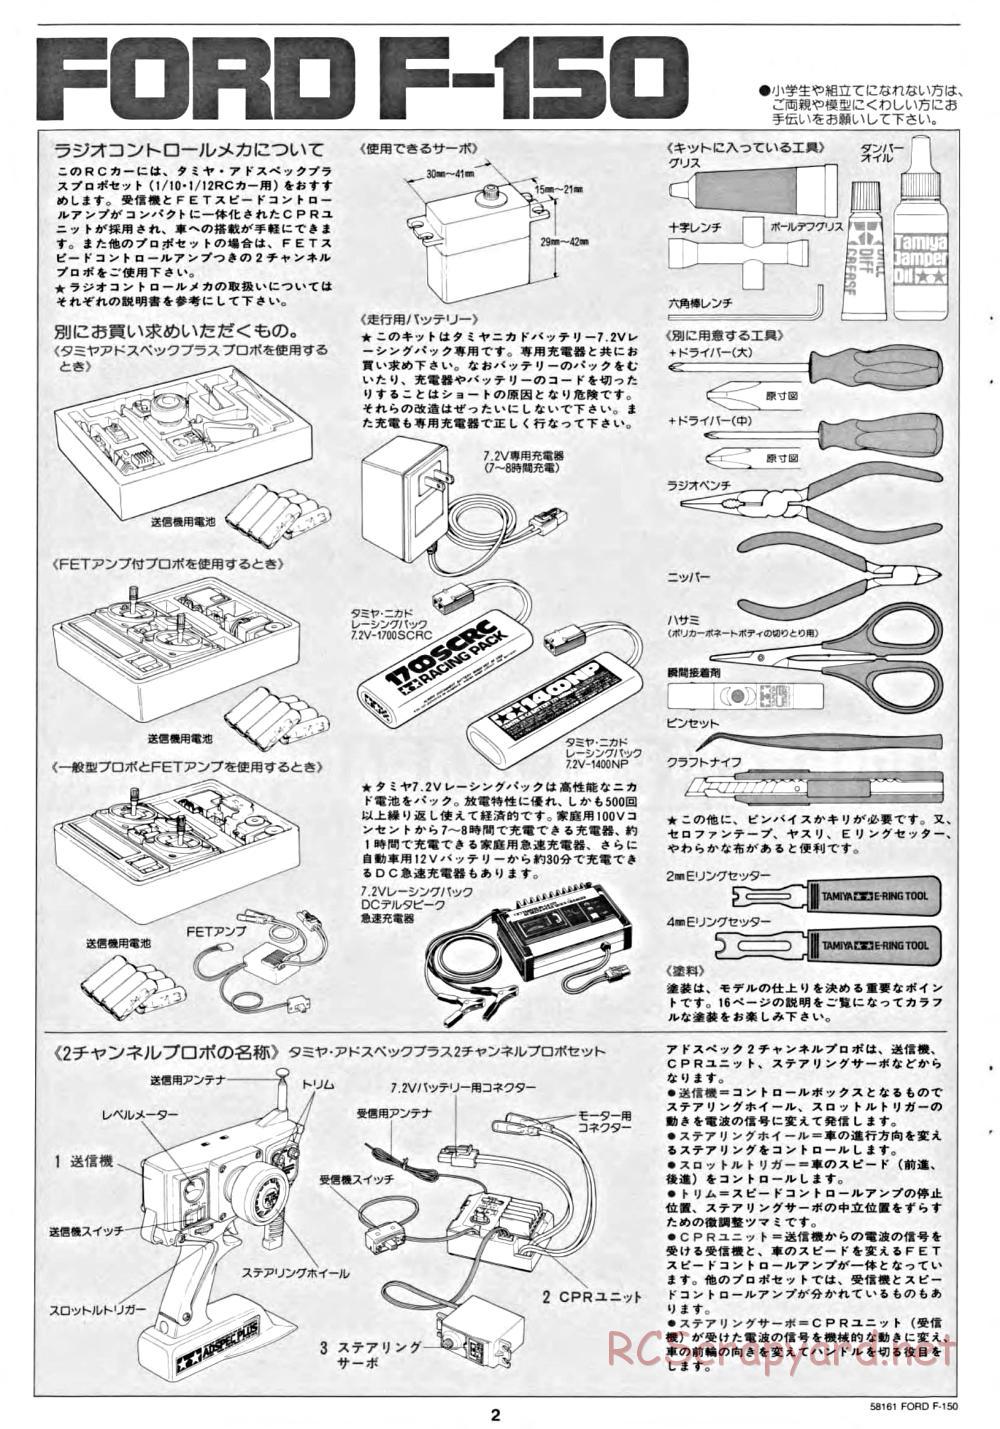 Tamiya - Ford F-150 Truck Chassis - Manual - Page 2